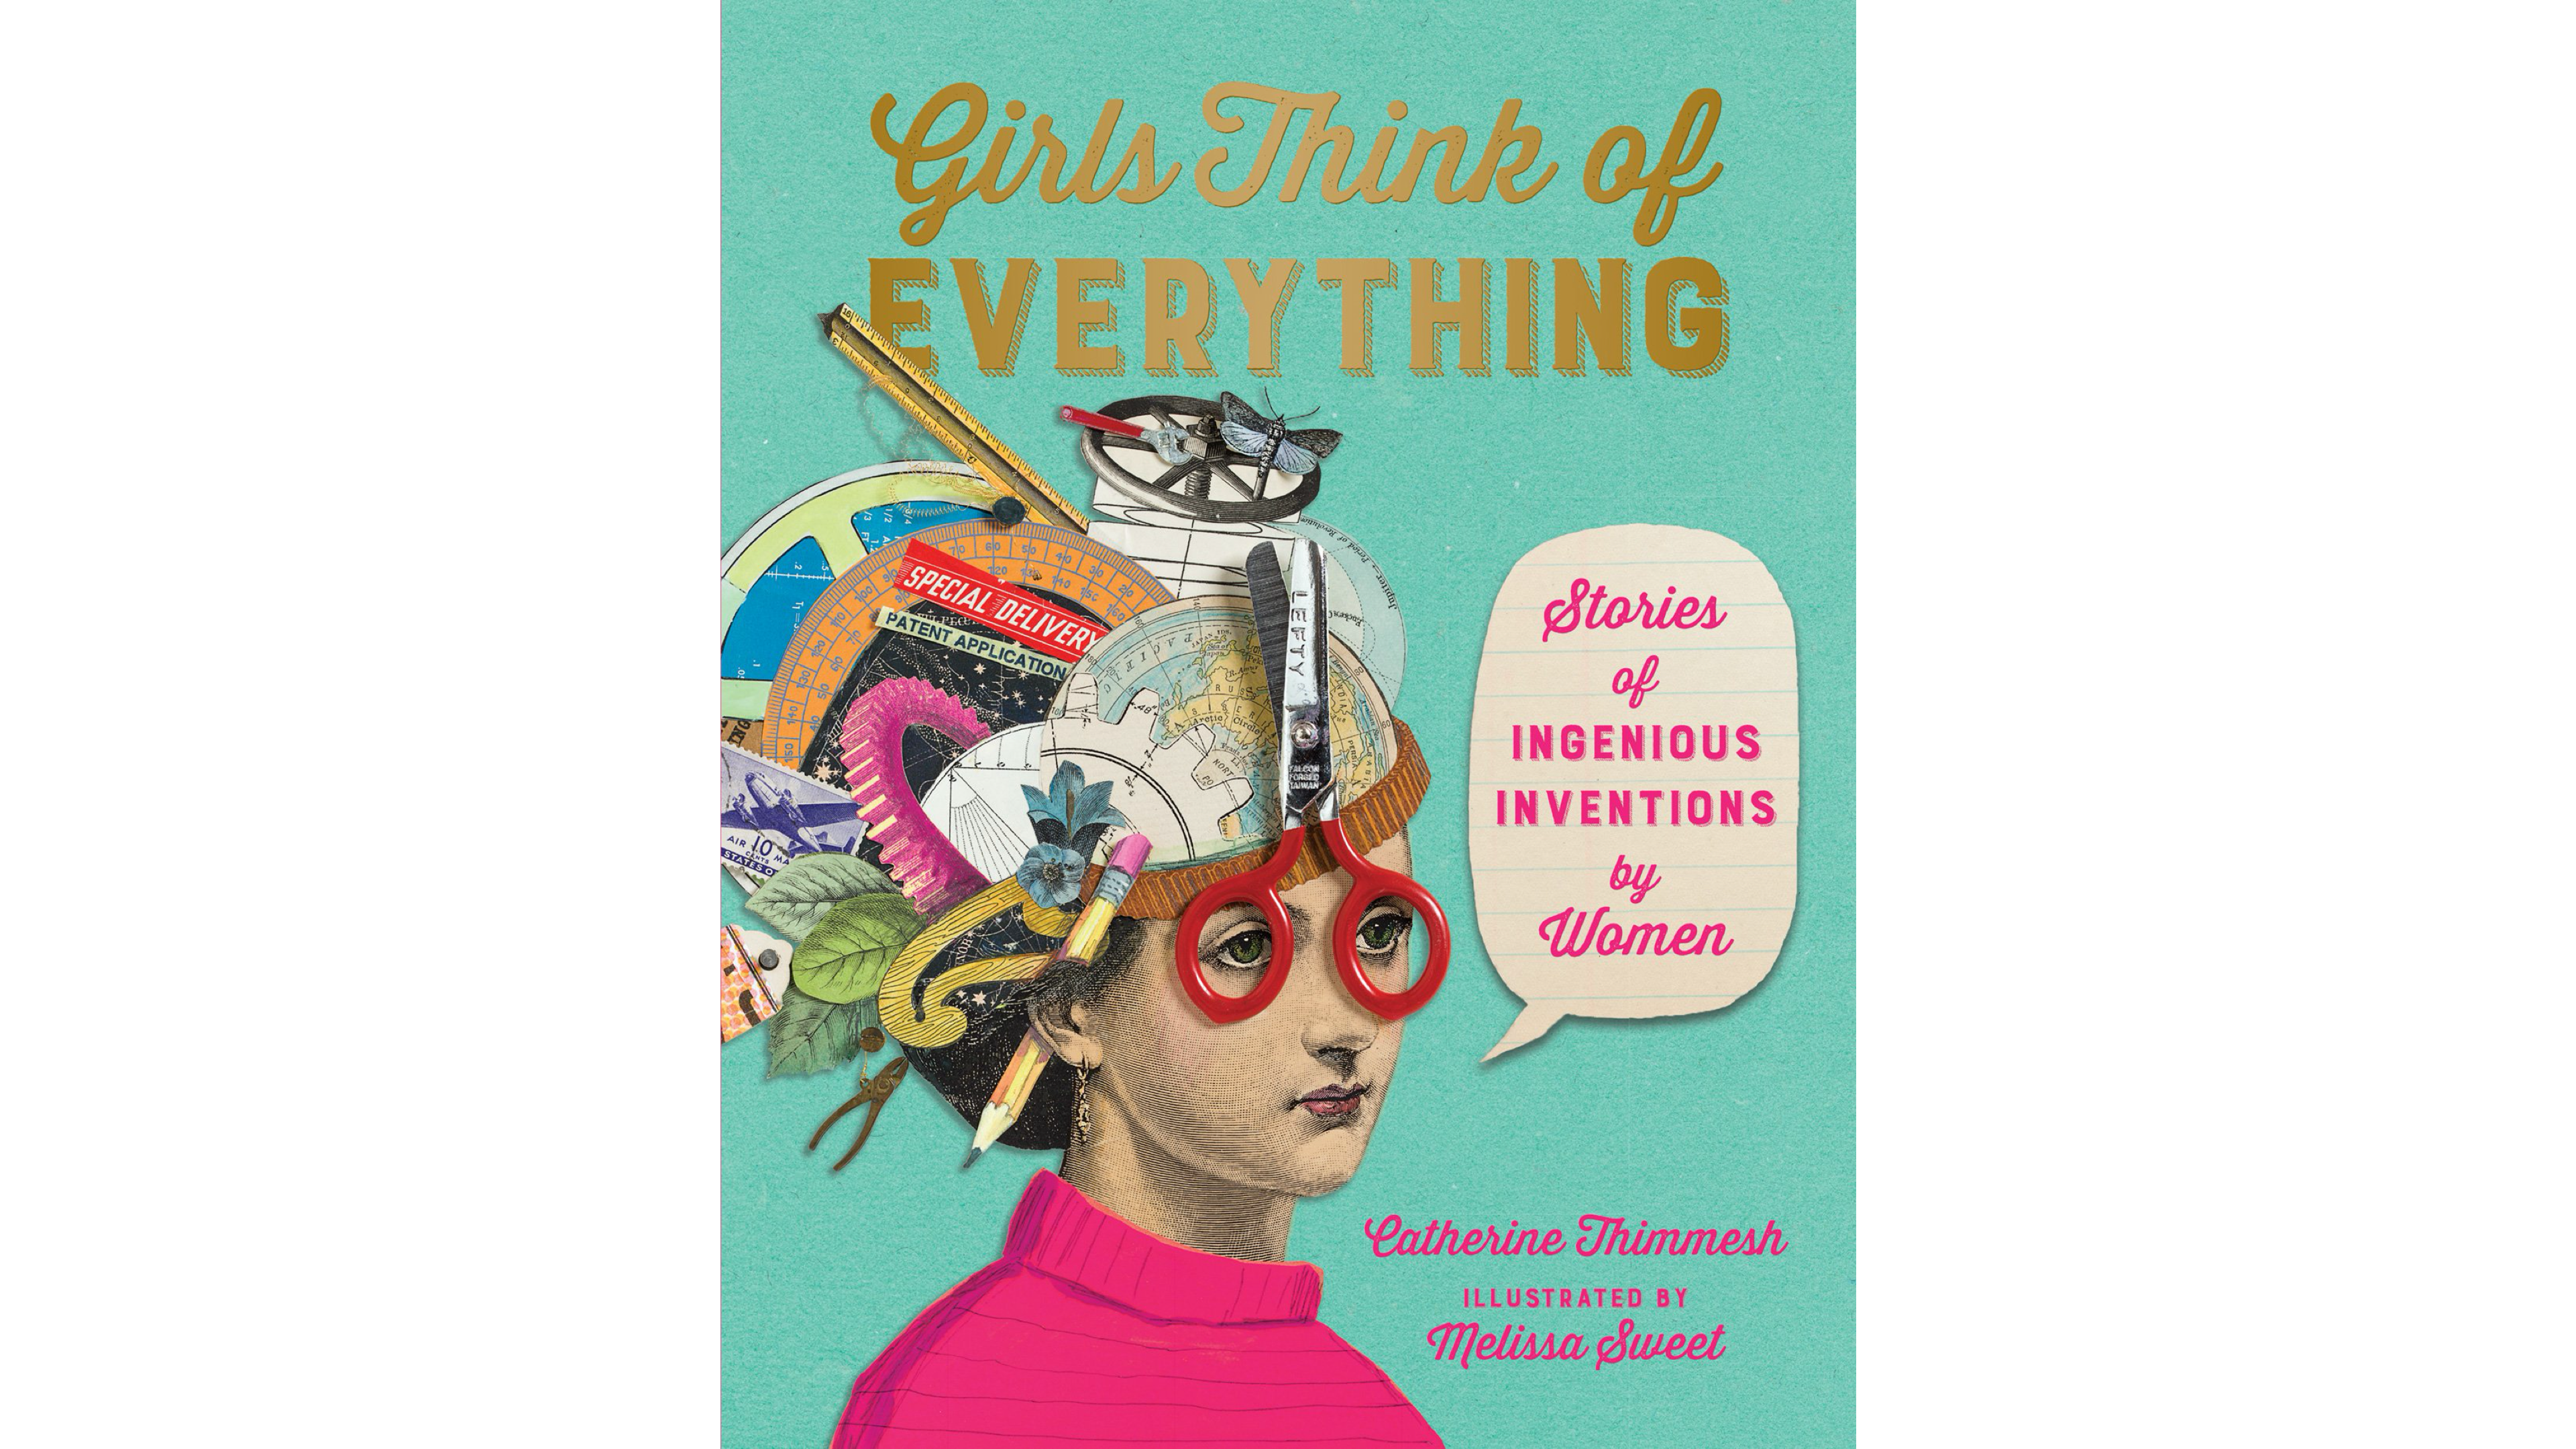 book about famous female inventions in history